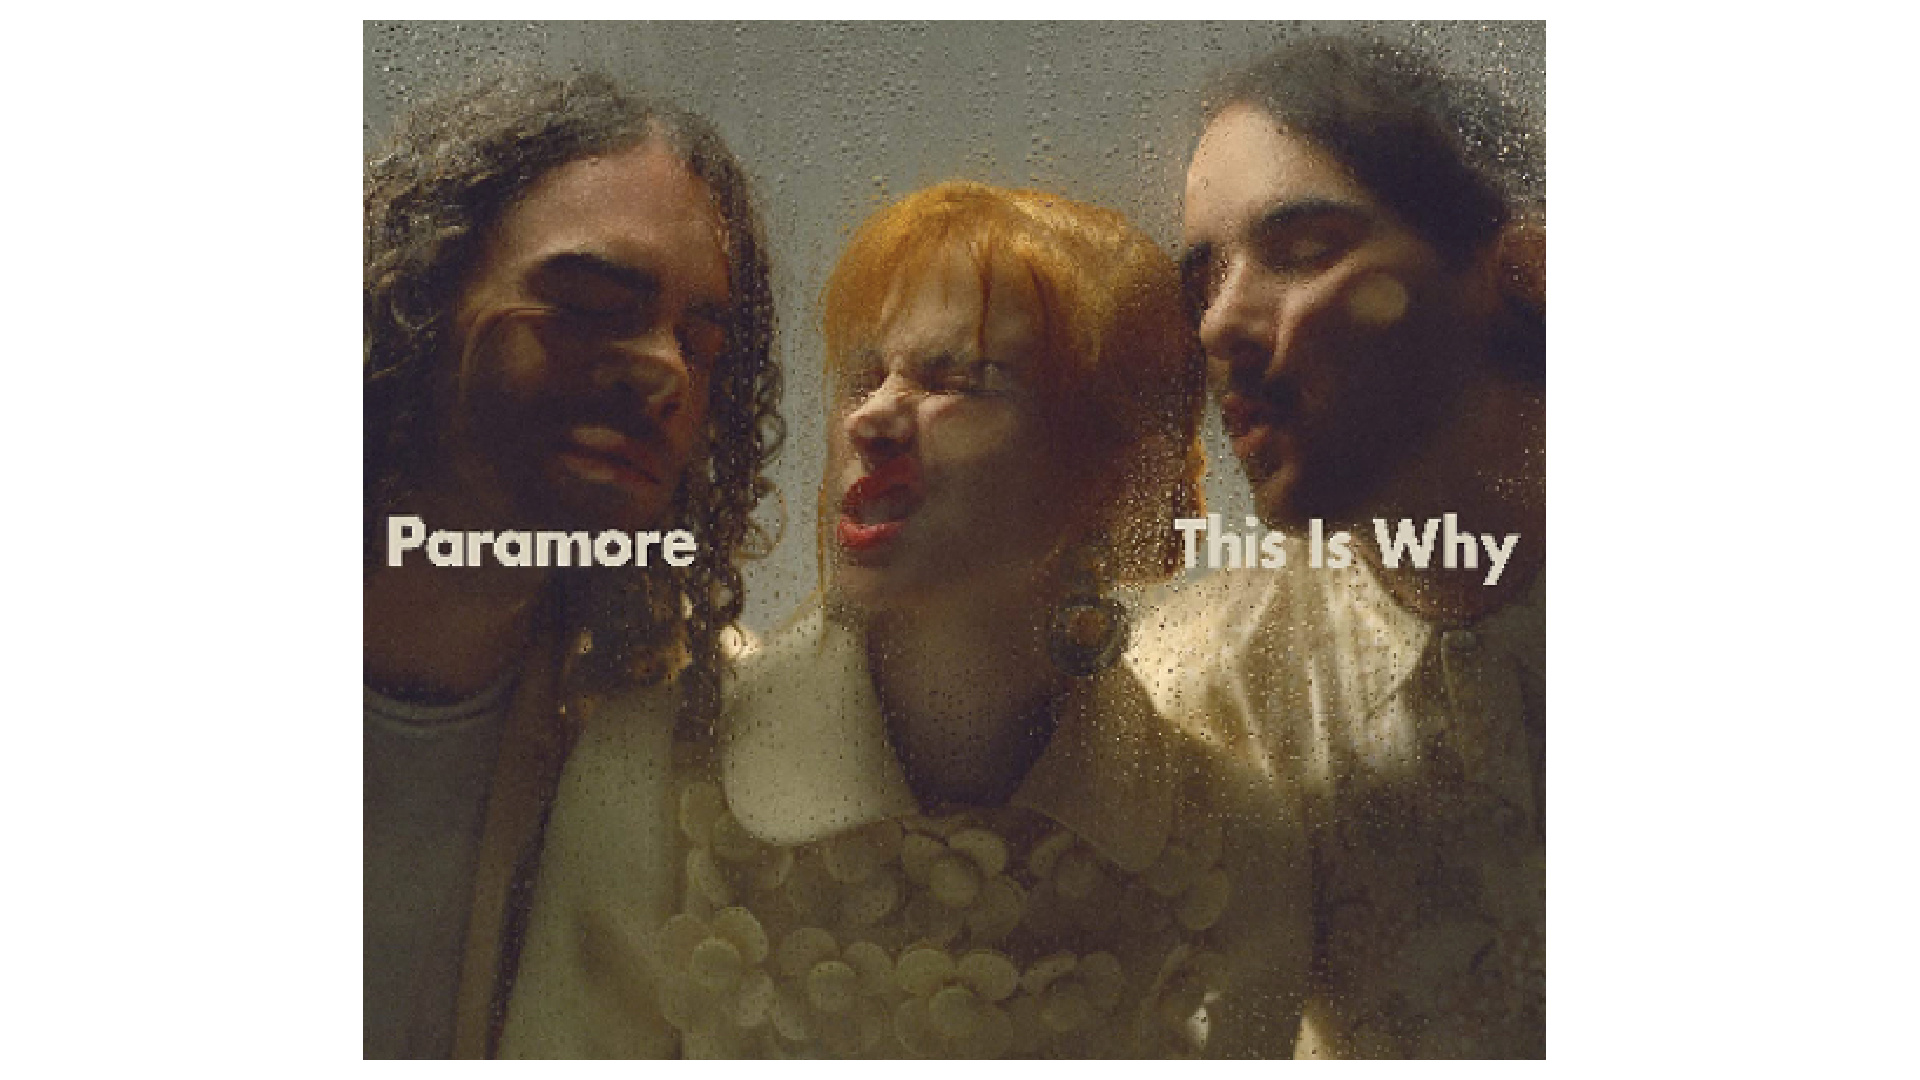 Paramore, 'This Is Why' 